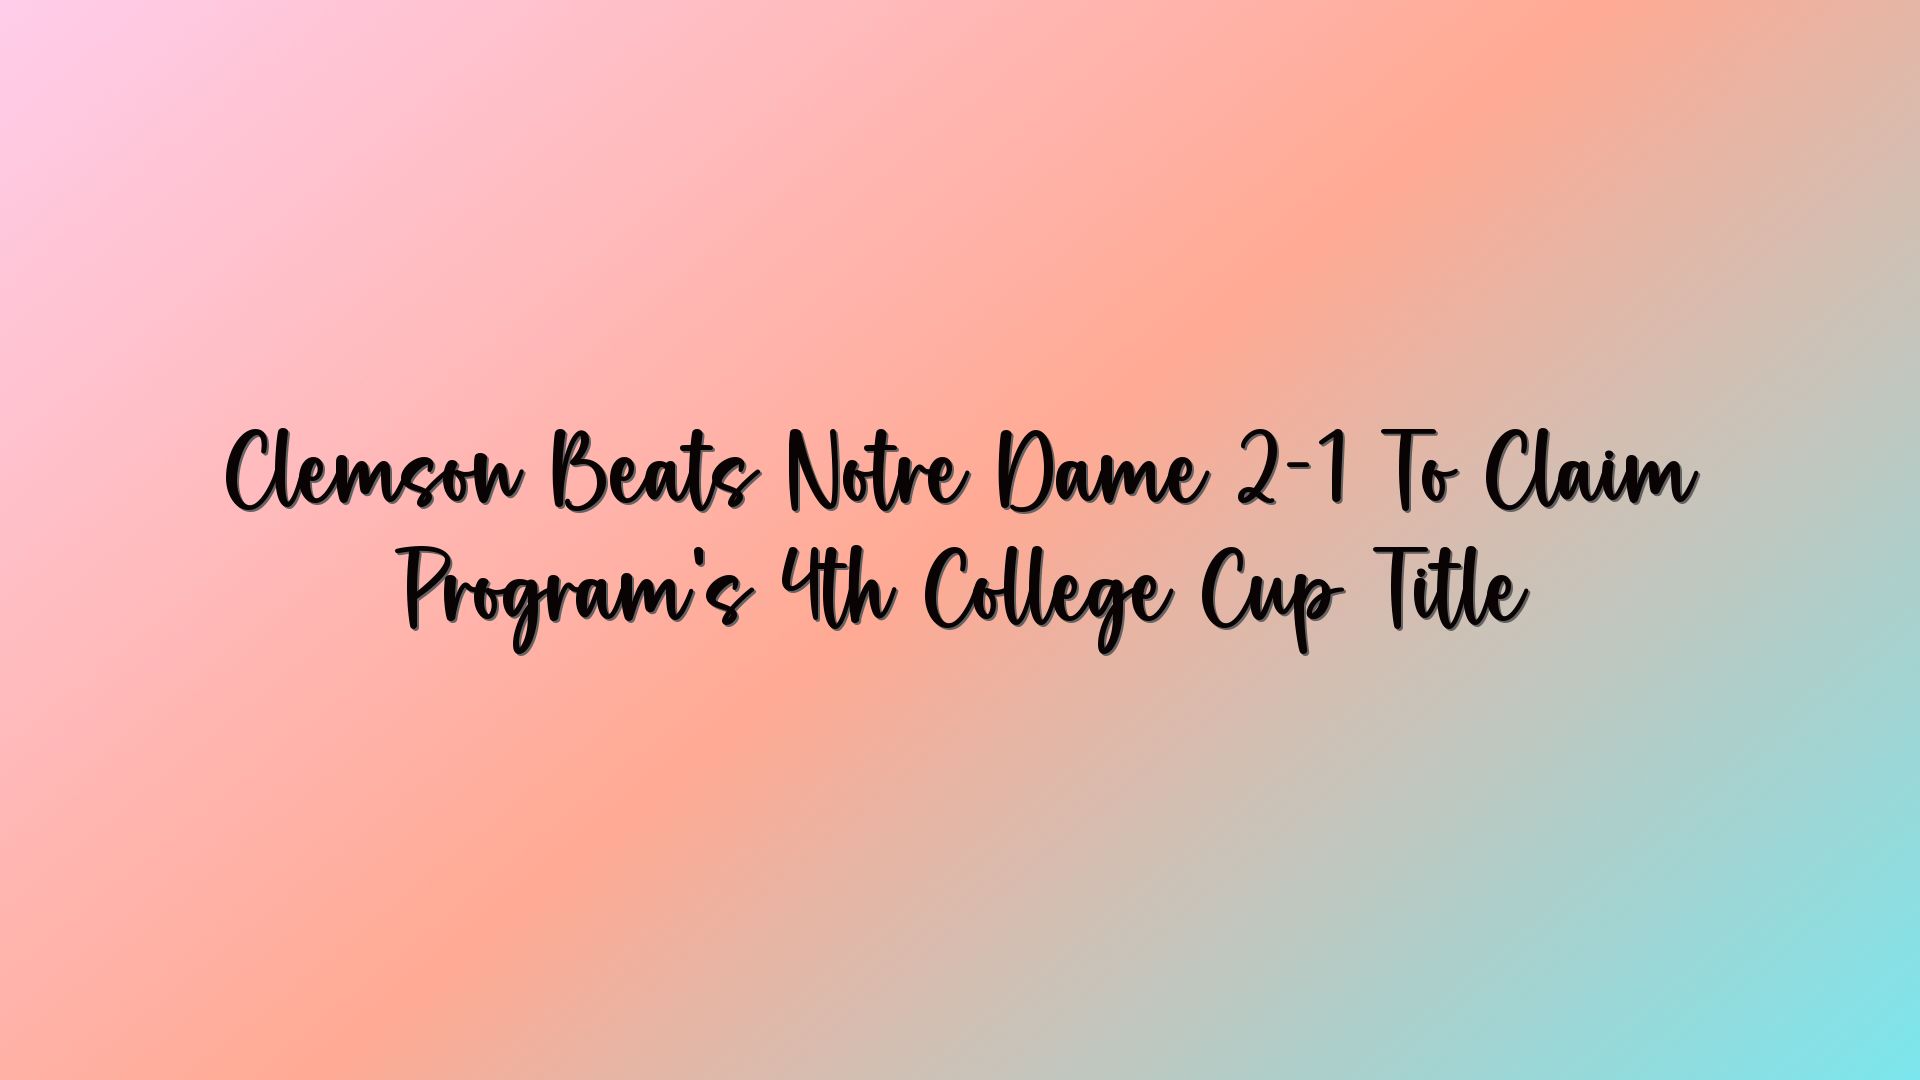 Clemson Beats Notre Dame 2-1 To Claim Program’s 4th College Cup Title